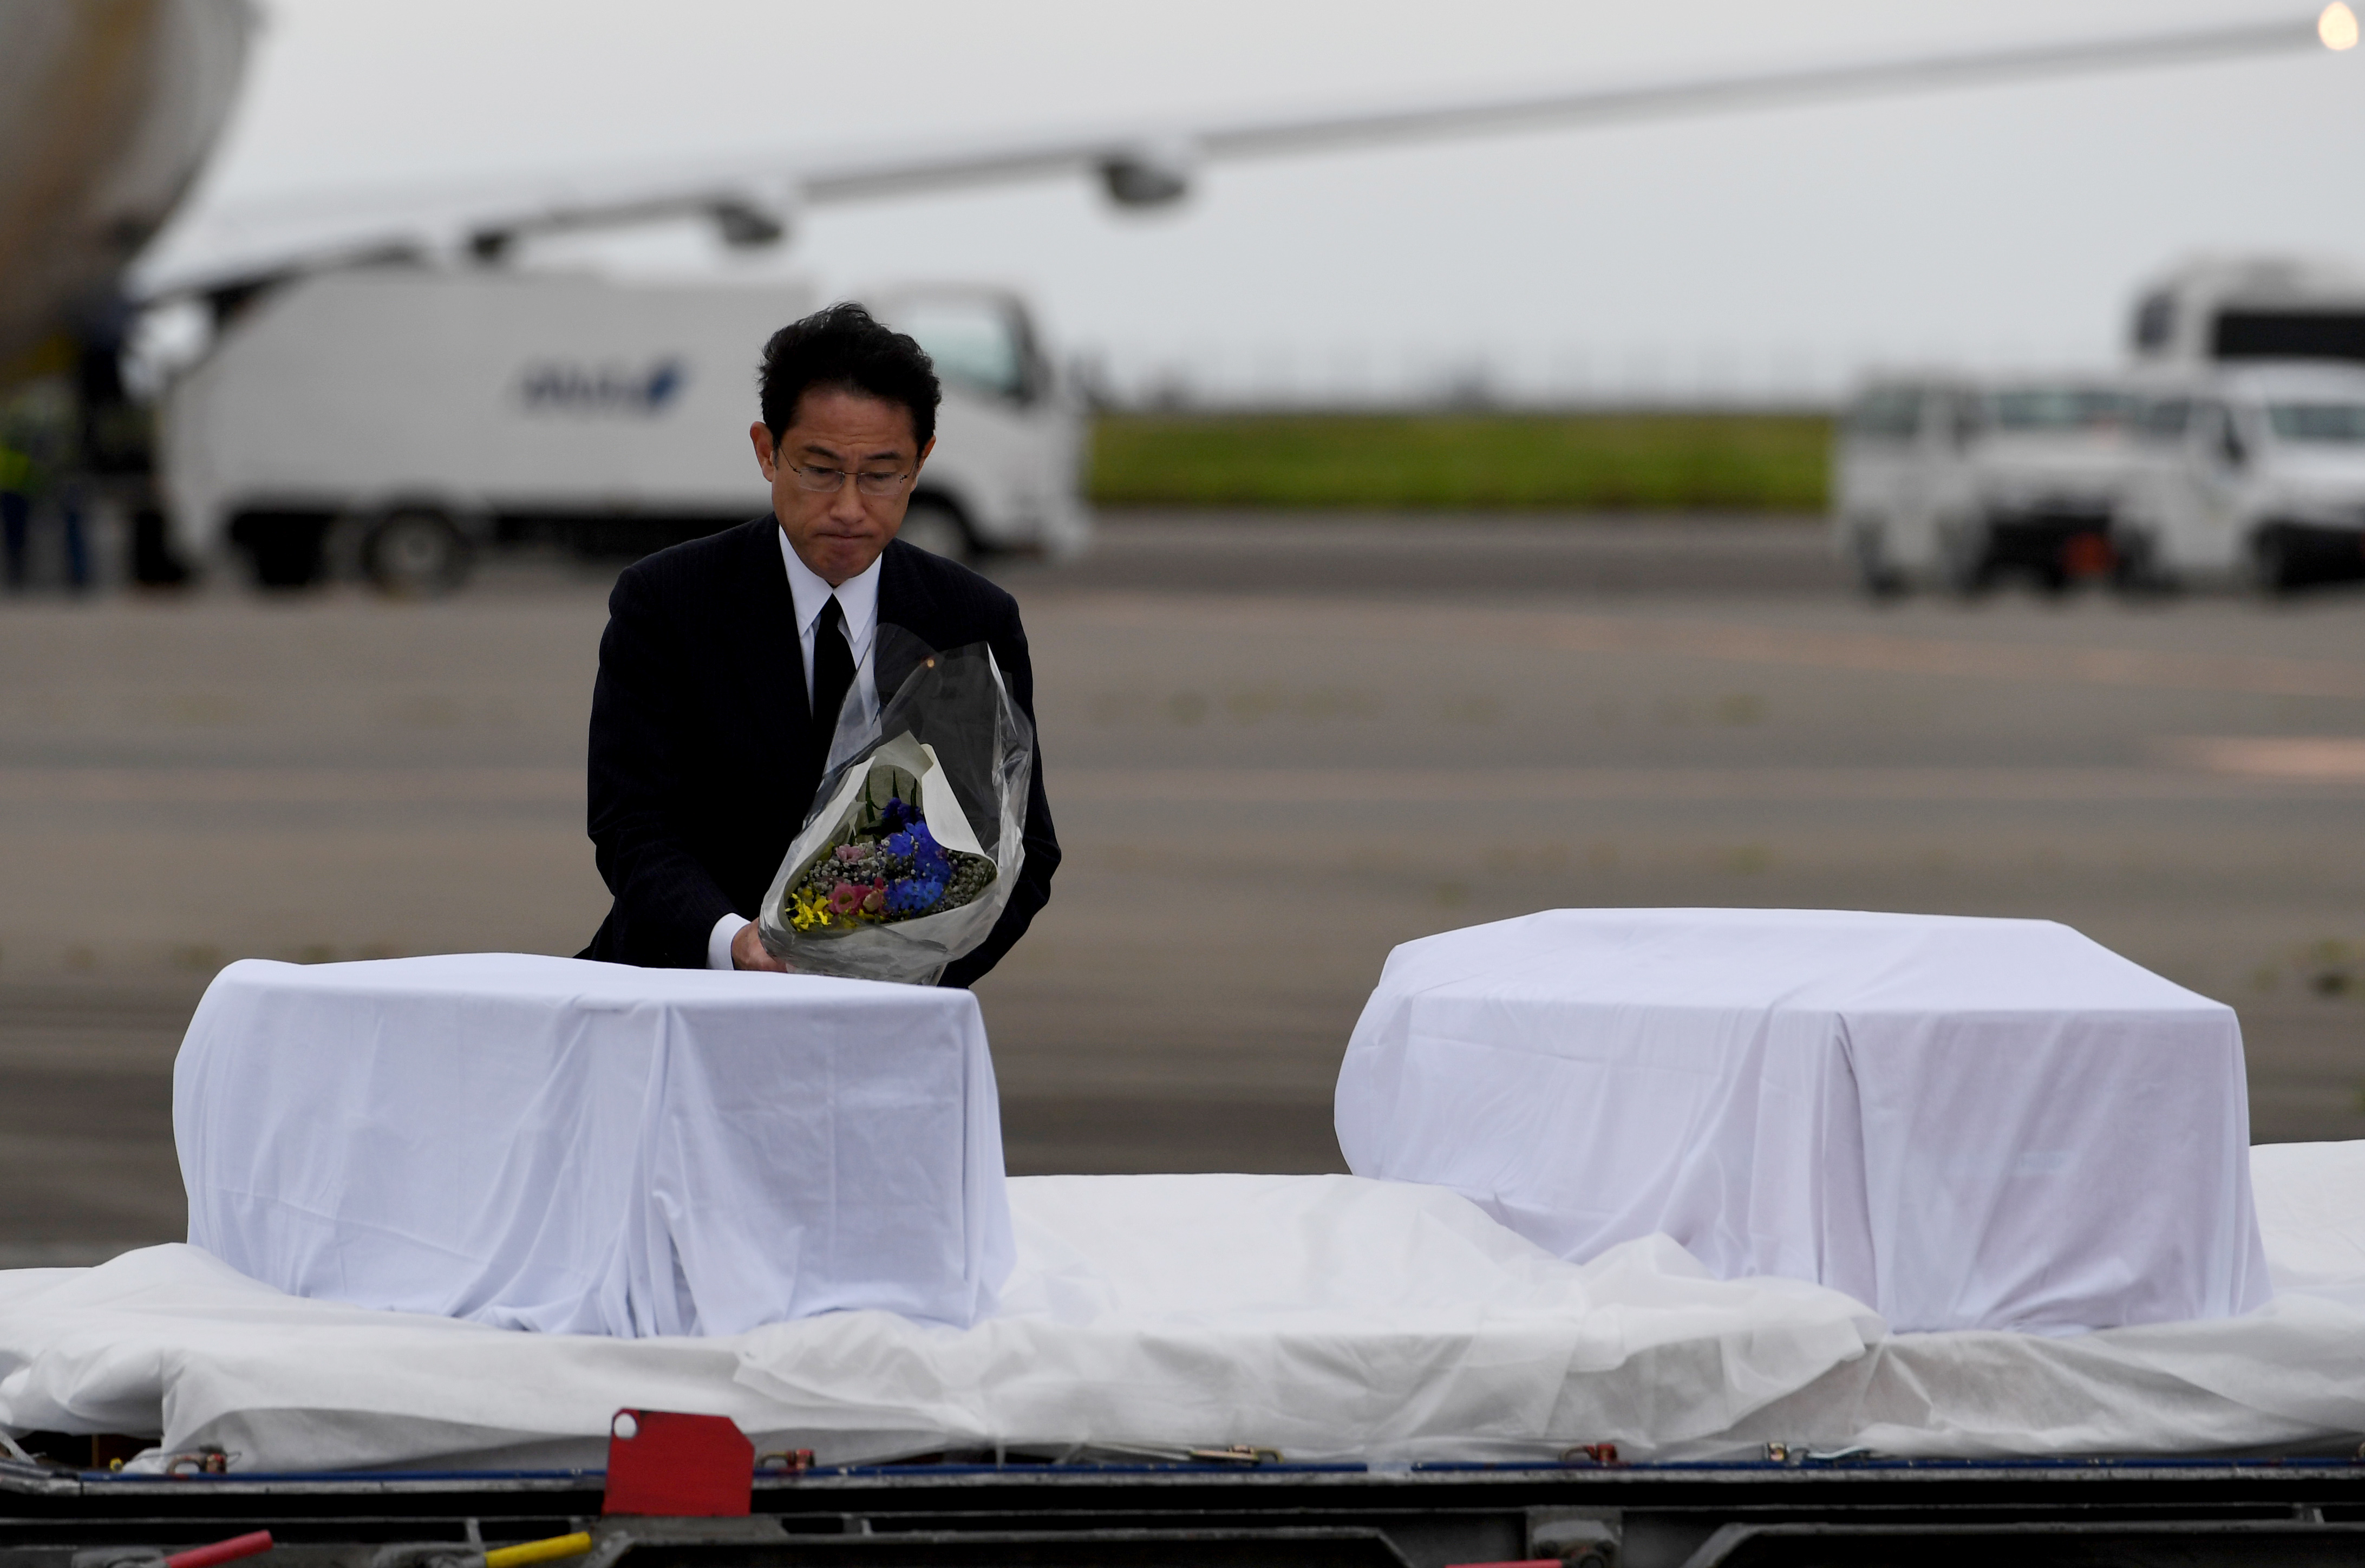 Japanese Foreign Minister Fumio Kishida places a bouquet of flowers among the coffins of Japanese victims upon their arrival at Tokyo International Airport at Haneda on July 5, 2016 from Dhaka following a siege at a Bangladesh café. Hostage-takers on July 1 killed 20, including seven Japanese nationals, all of whom were engaged in development projects in Bangladesh with the government-run Japan International Cooperation Agency (JICA). / AFP PHOTO / TOSHIFUMI KITAMURA